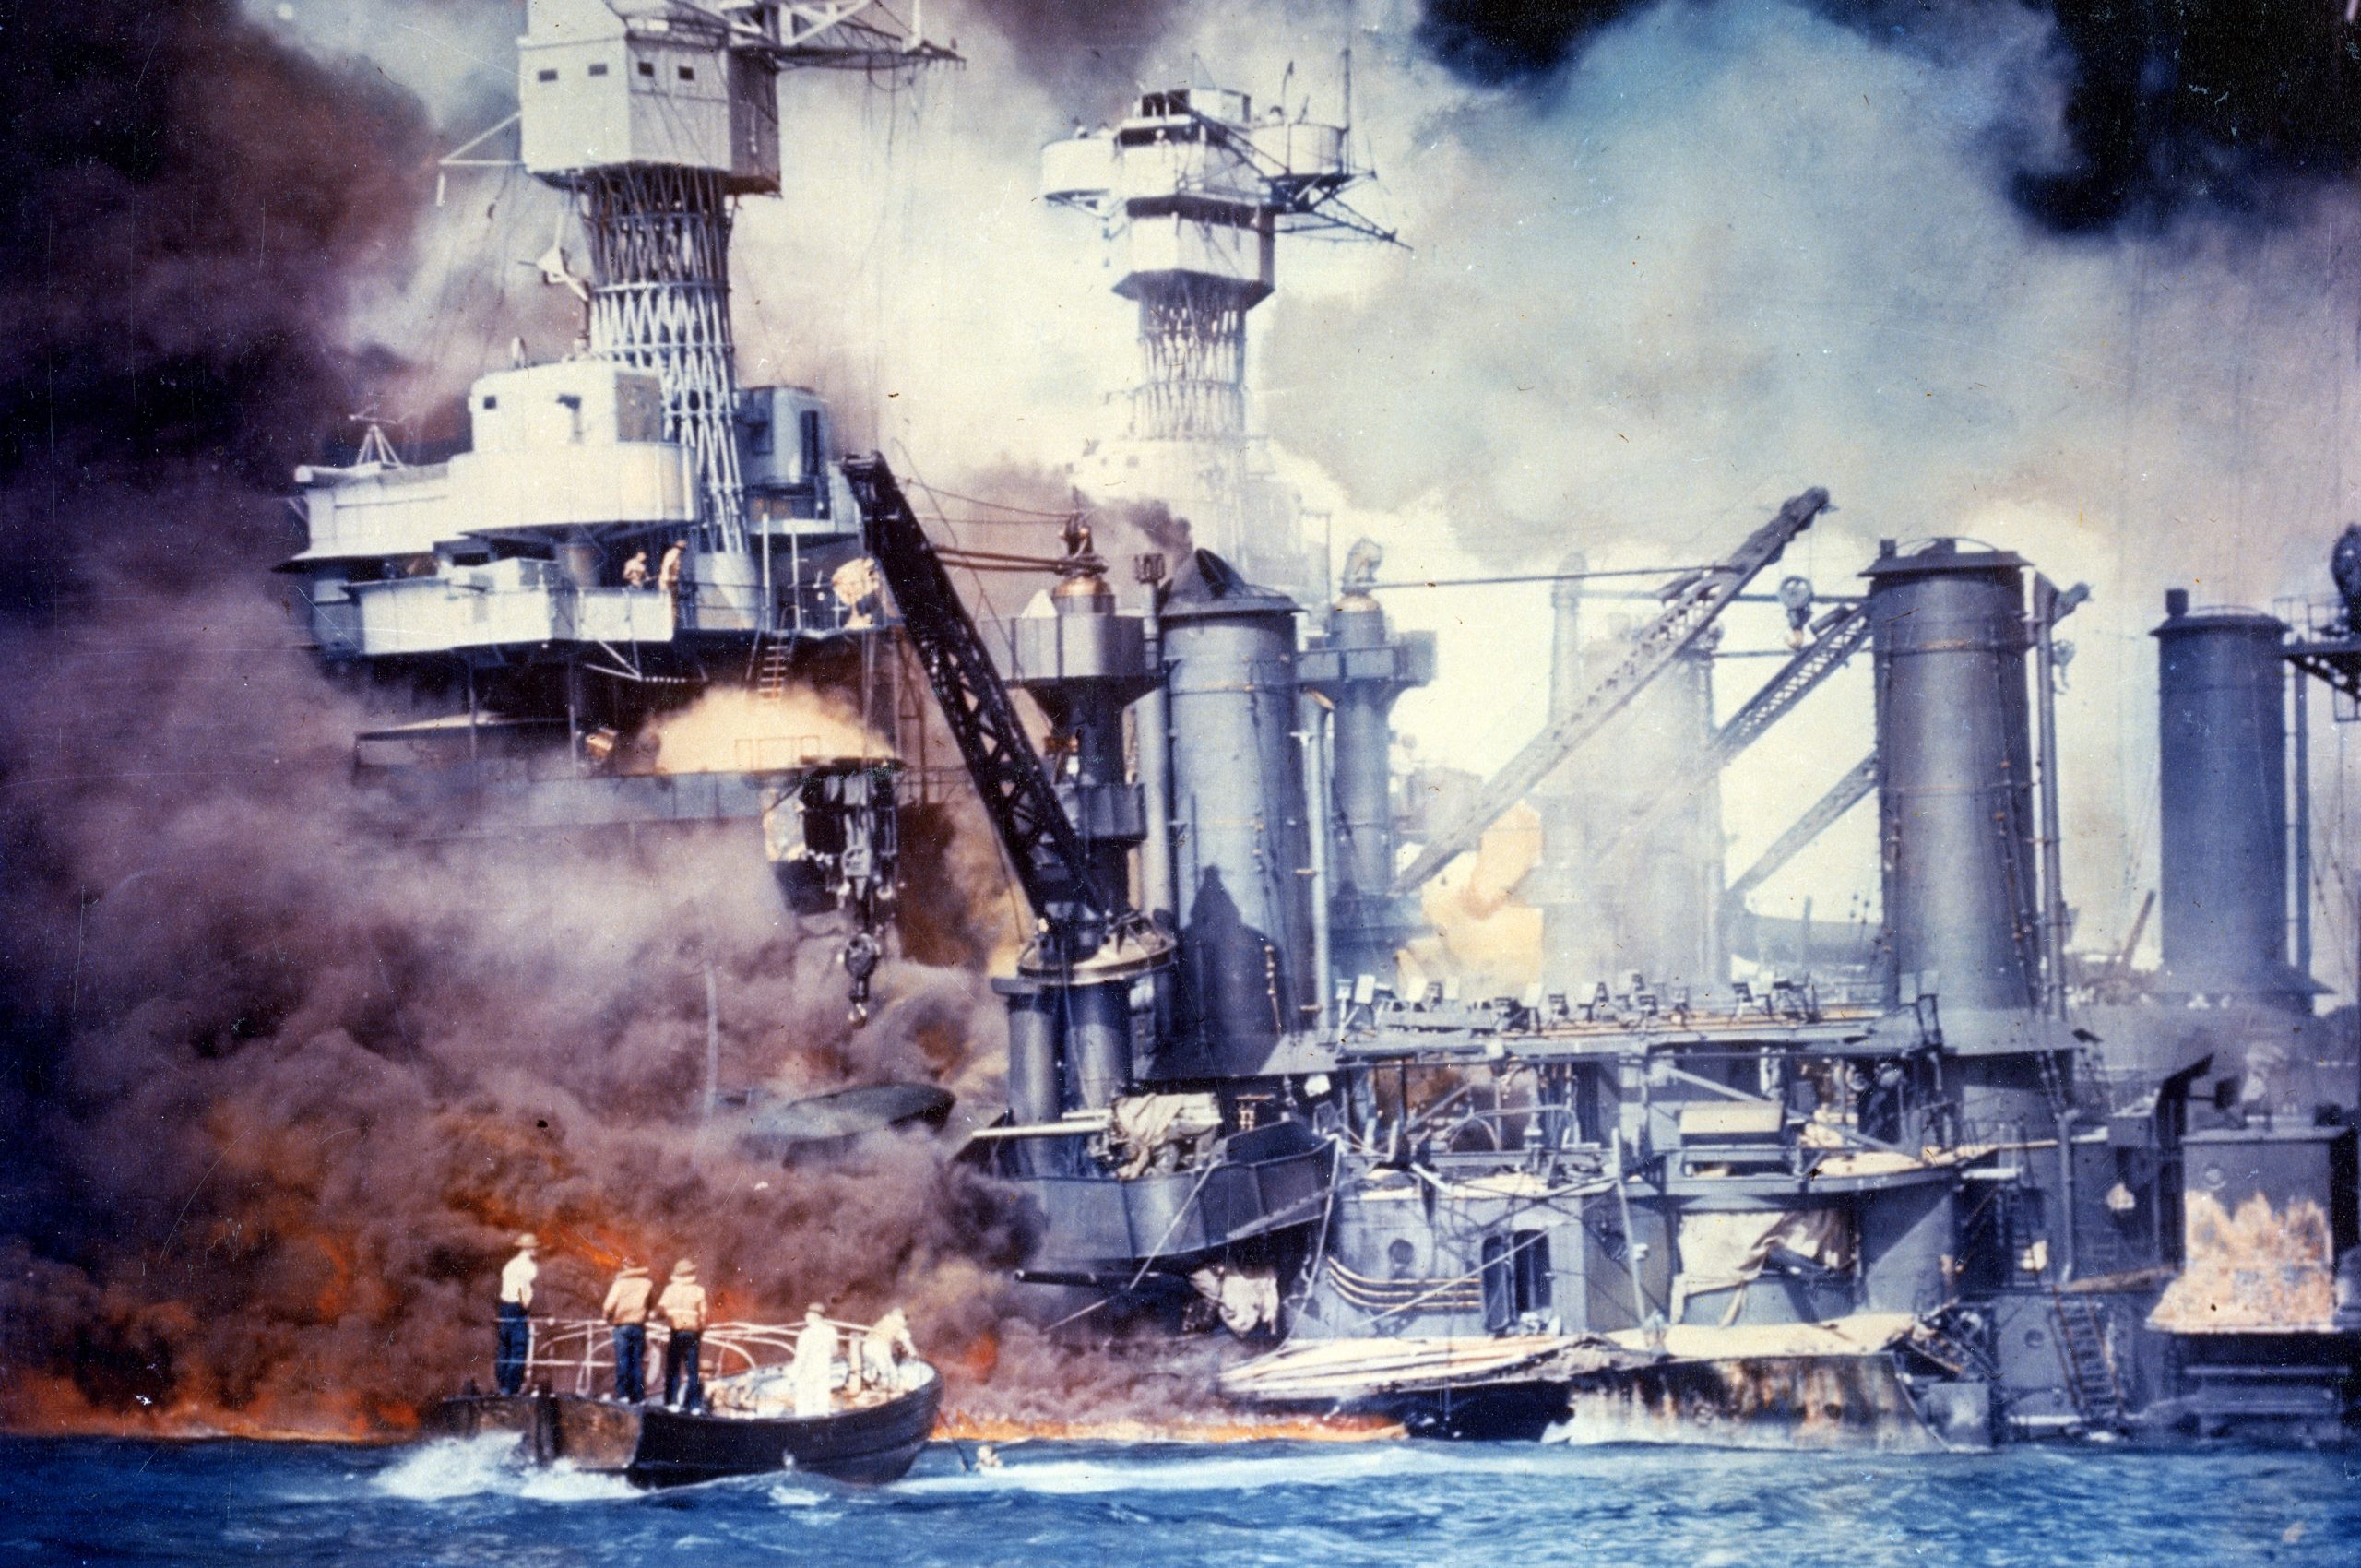 Sailors in a motor launch rescue a survivor from the water alongside the sunken USS West Virginia (BB-48) during or shortly after the Japanese air raid on Pearl Harbor. USS Tennessee (BB-43) is inboard of the sunken battleship.